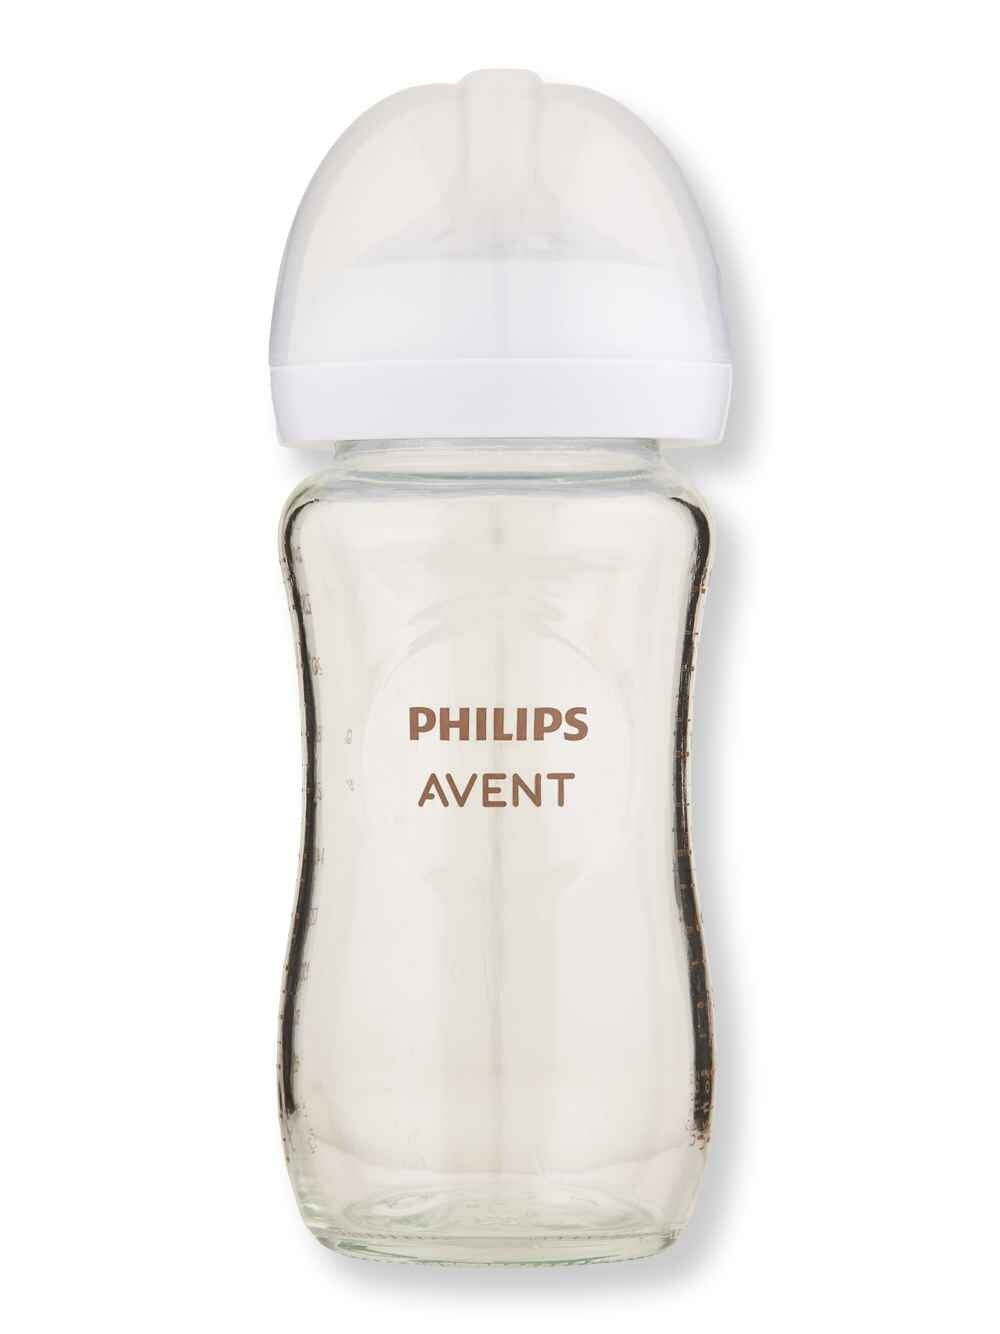 Philips Avent Philips Avent Glass Natural Baby Bottle With Natural Response Nipple 8 oz Baby Bottles 